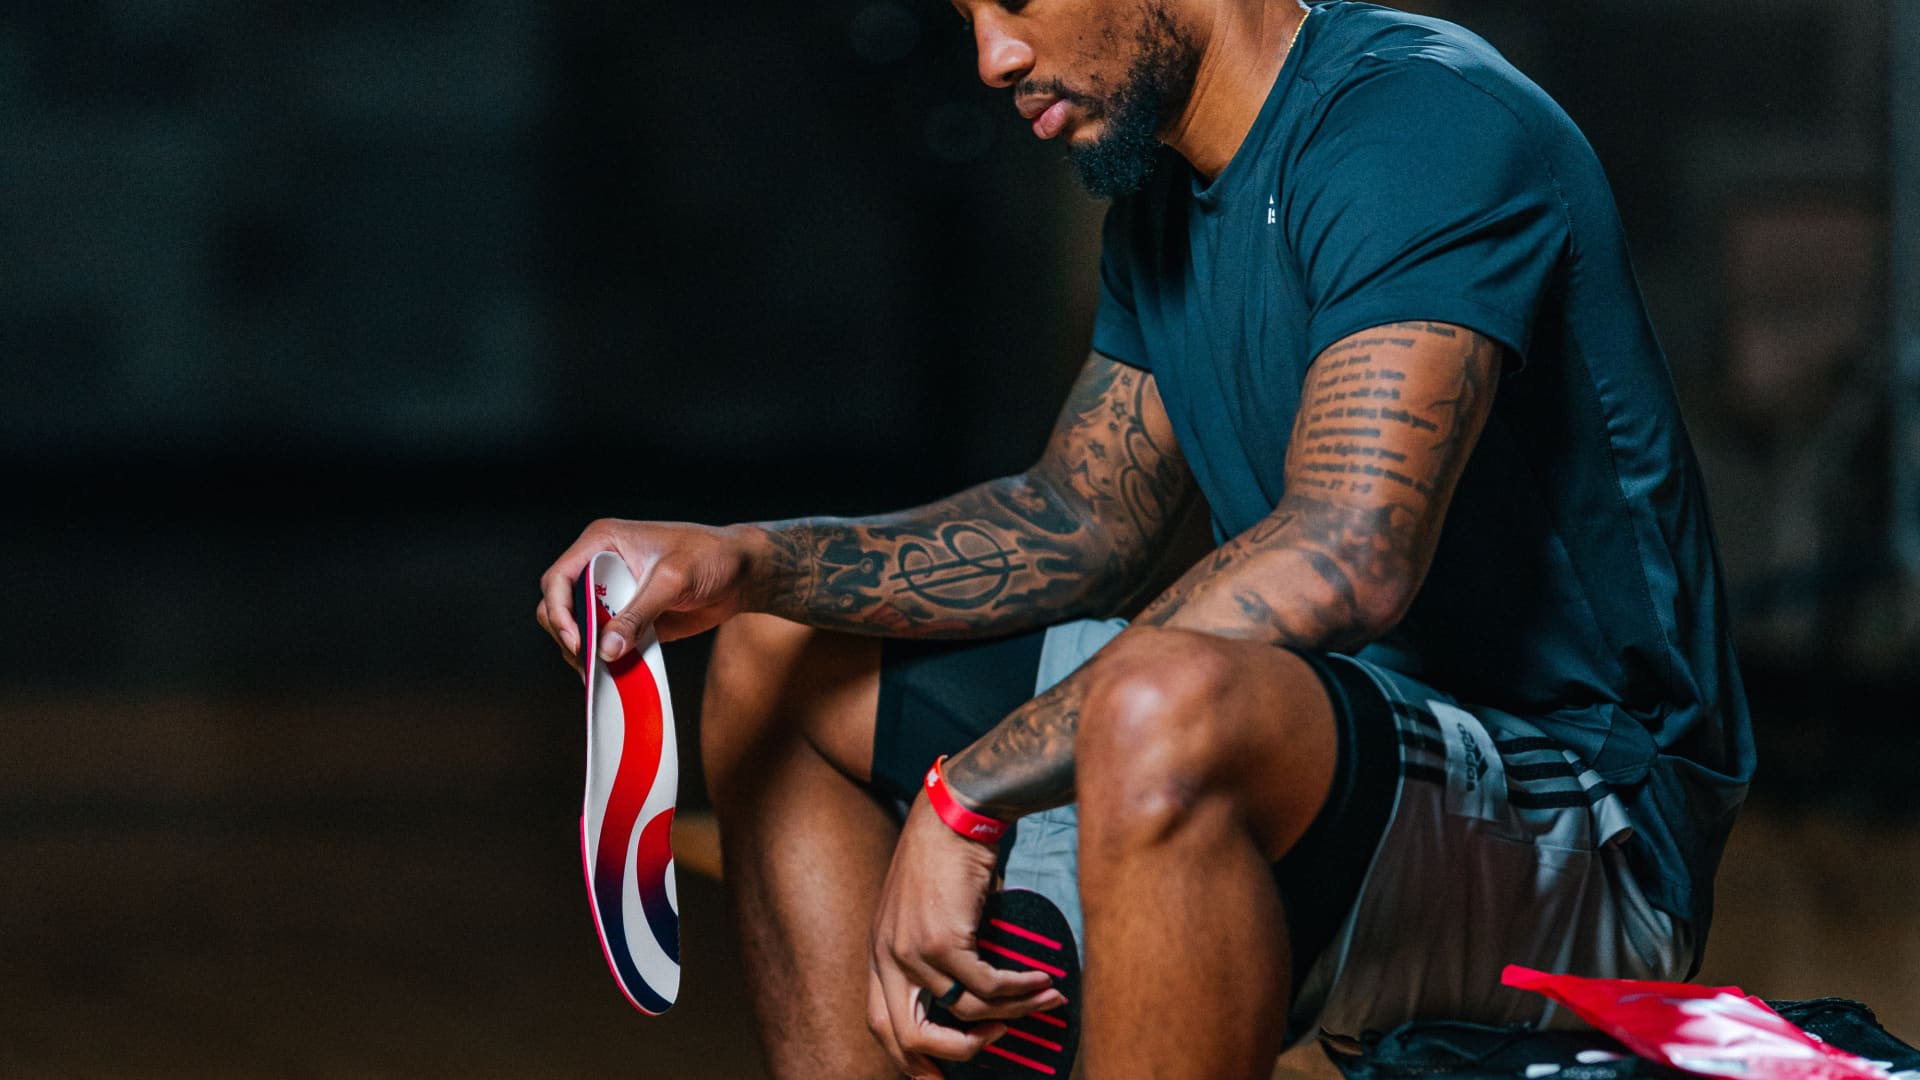 Damian Lillard's new investment in Move, a footwear insoles brand he co-founded.